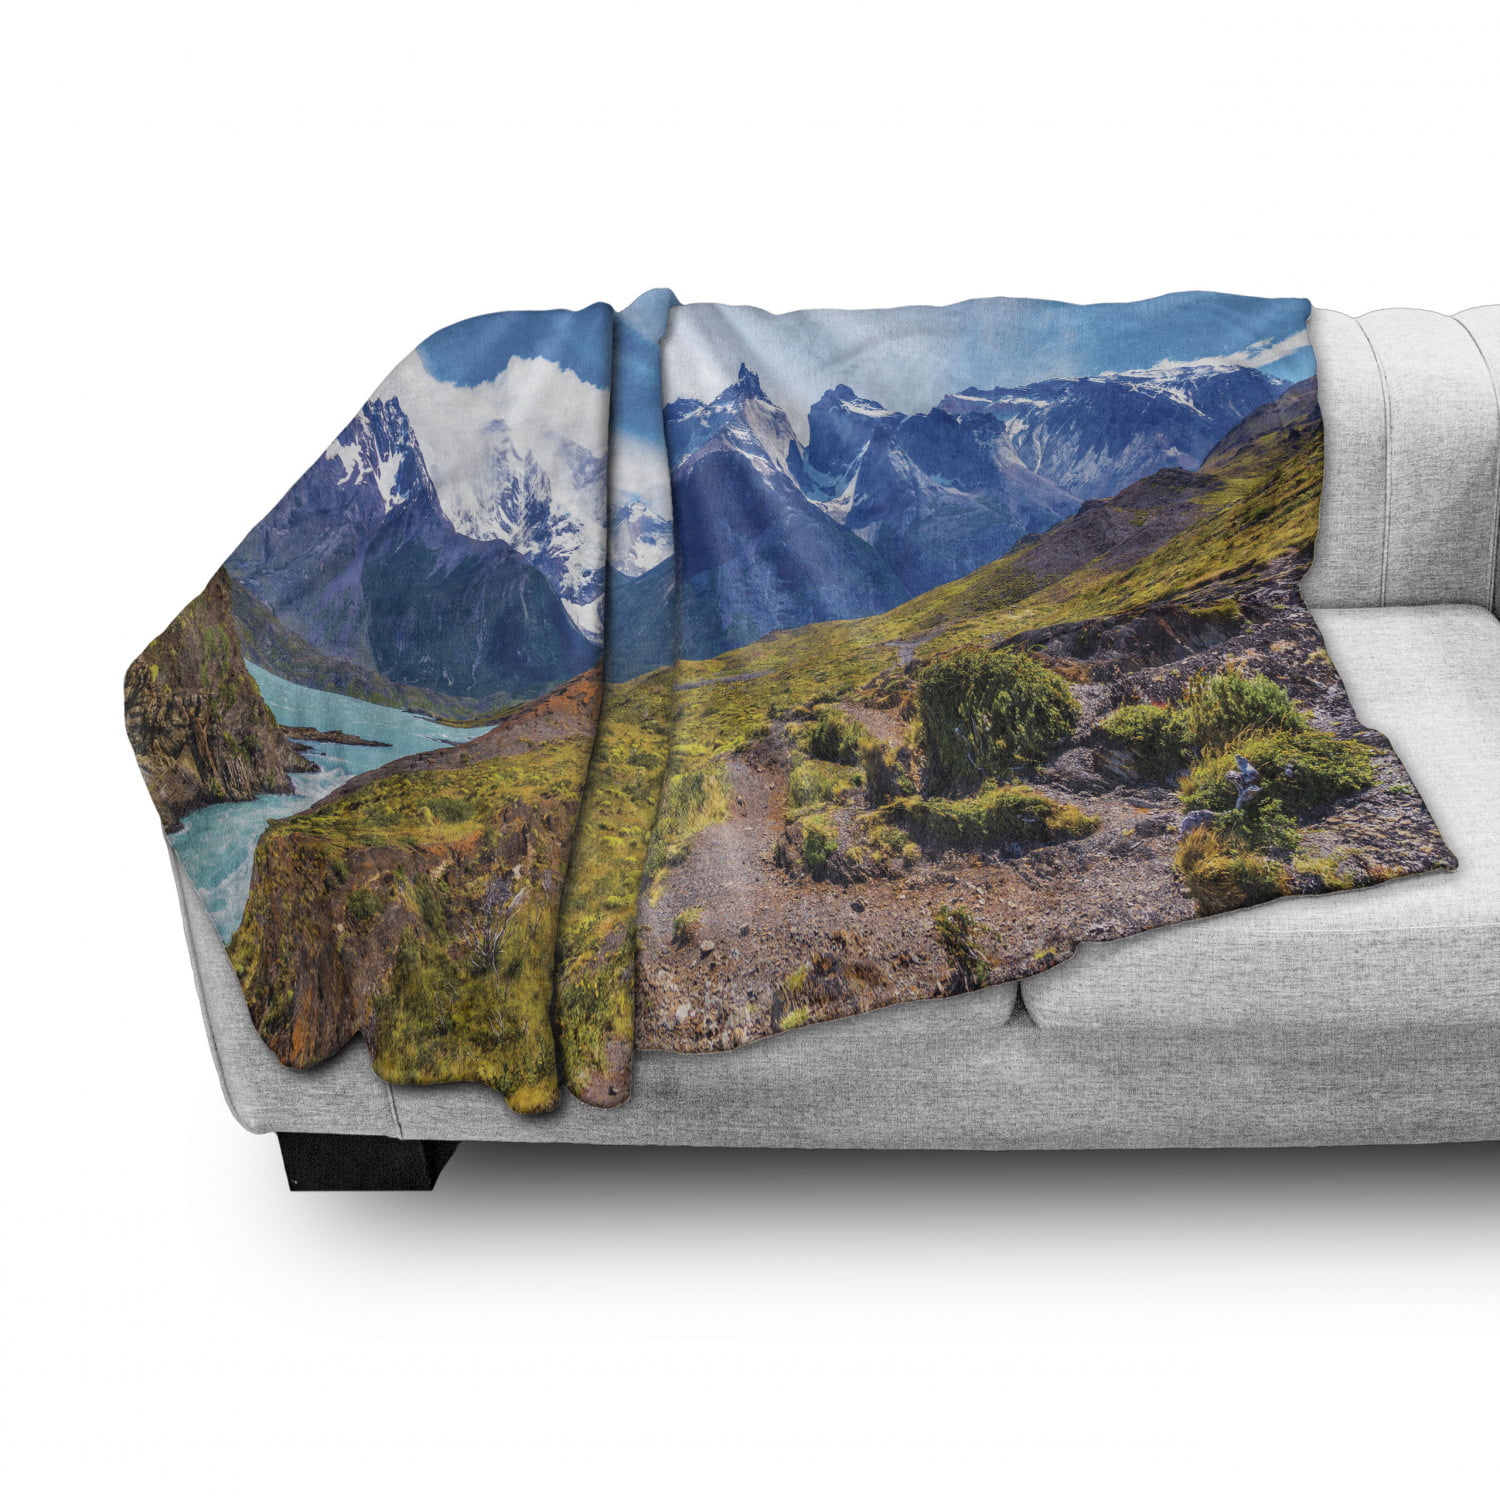 Azure Blue and Multicolor Ambesonne Colorful Throw Blanket 60 x 80 Landscape Image of Pehoe Lake at Torres Del Paine National Park Flannel Fleece Accent Piece Soft Couch Cover for Adults